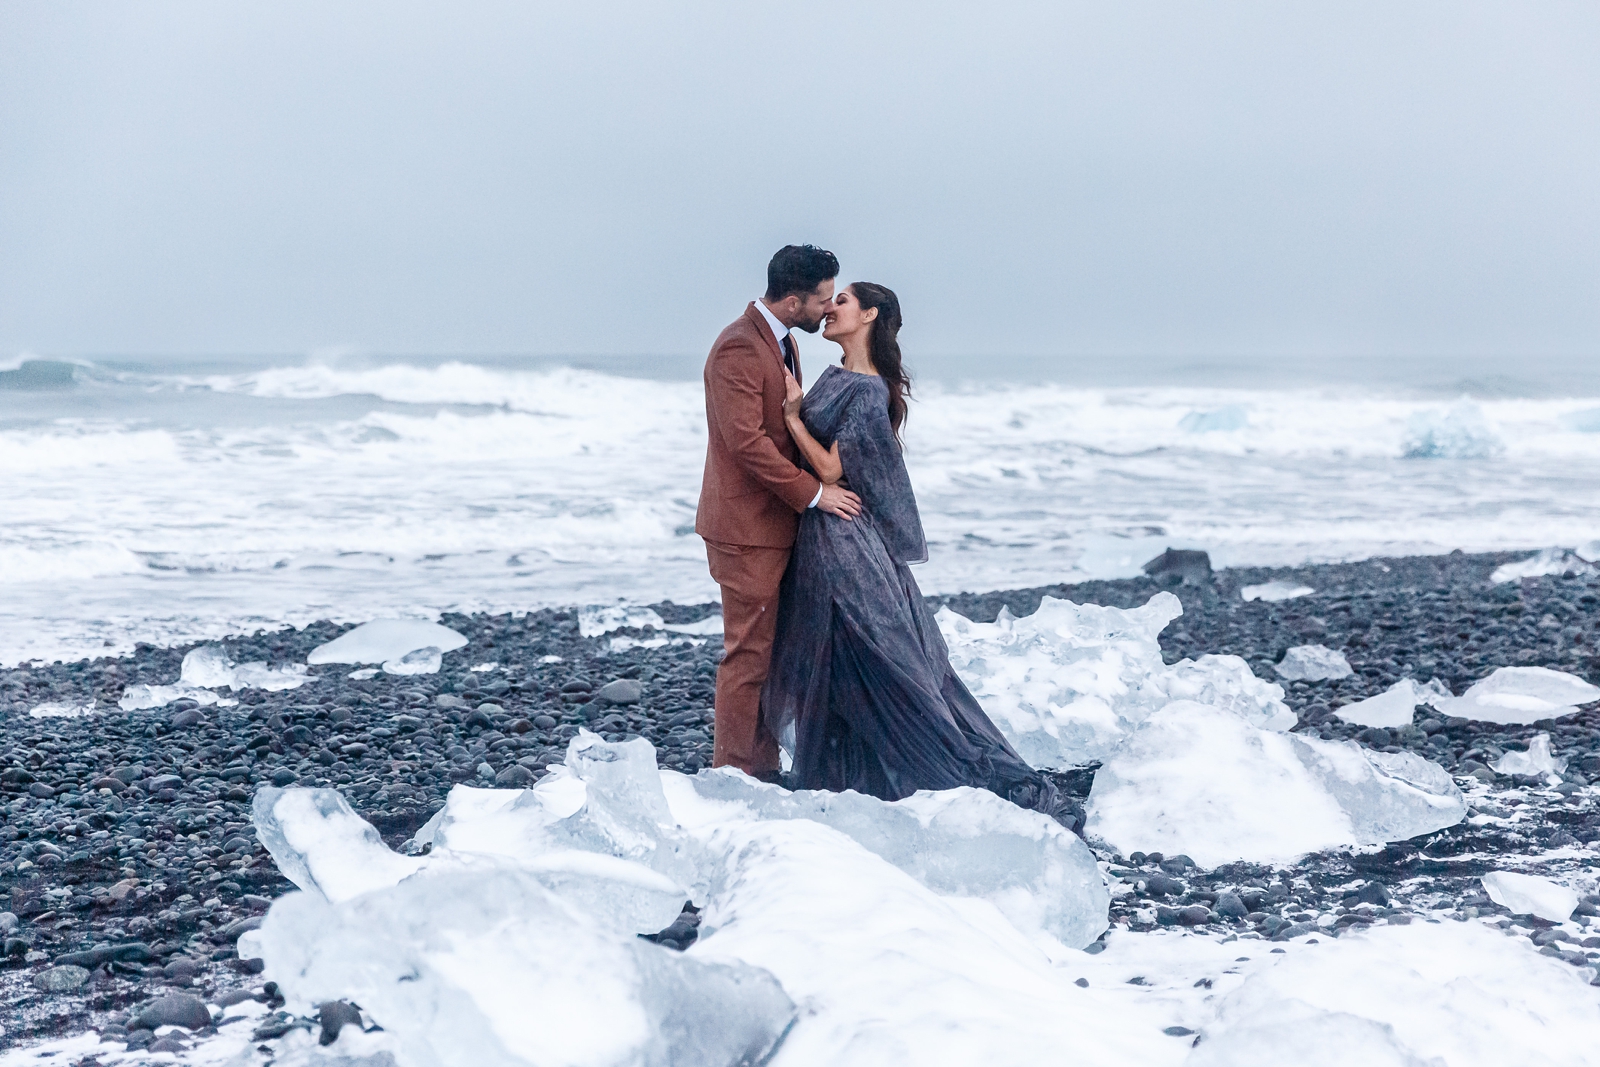 Diamond Beach in Iceland provides a dark fairytale backdrop for this eloping couple.